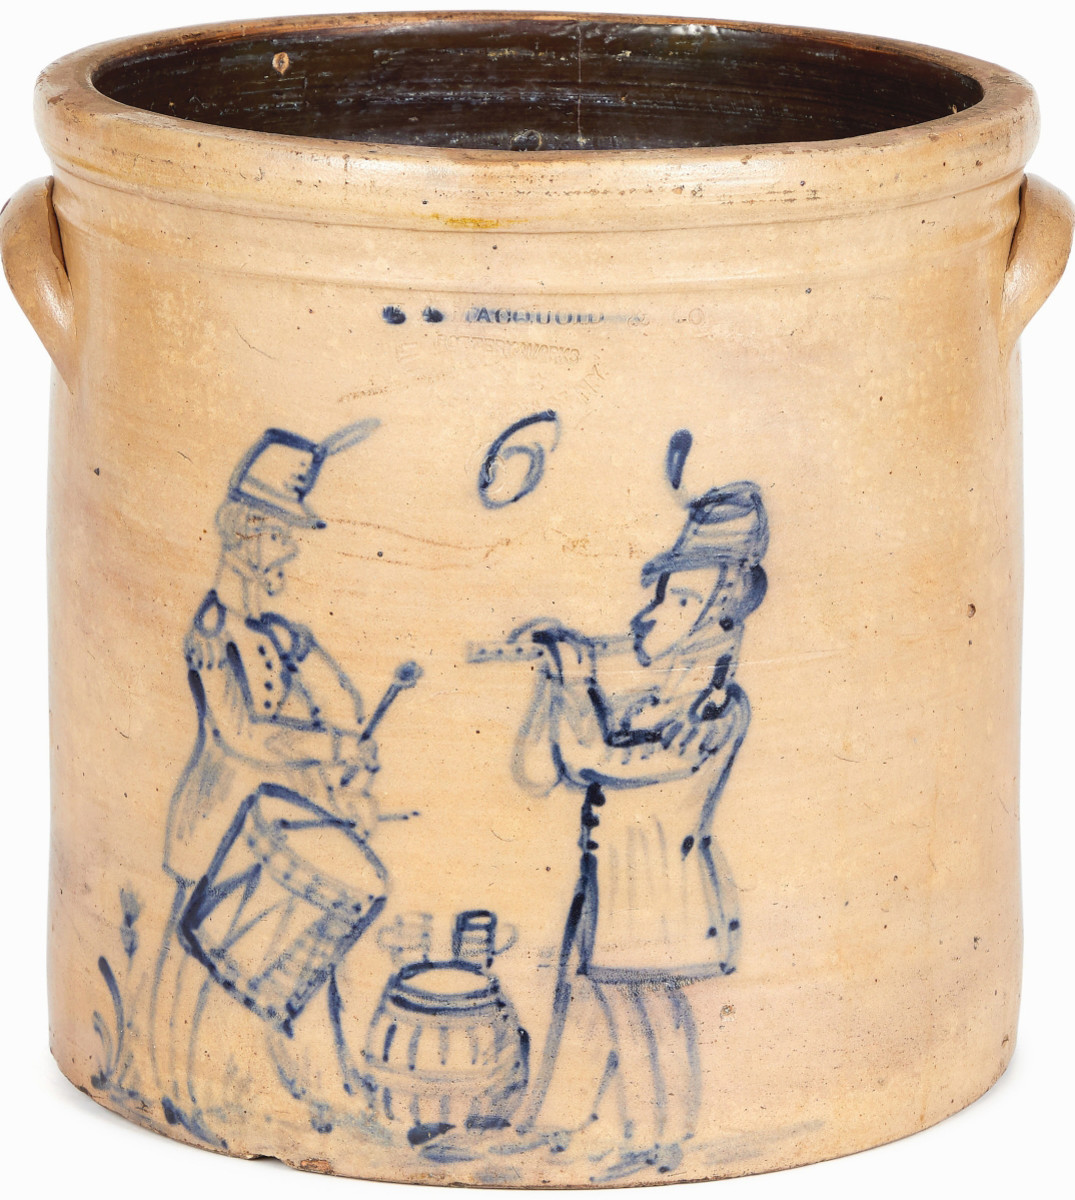 Two Civil War officers play a fife and drum around a keg in this cobalt-brushed crock by Manhattan potter William Macquoid and from the Bud and Judy Newman Collection. It sold for $51,660.